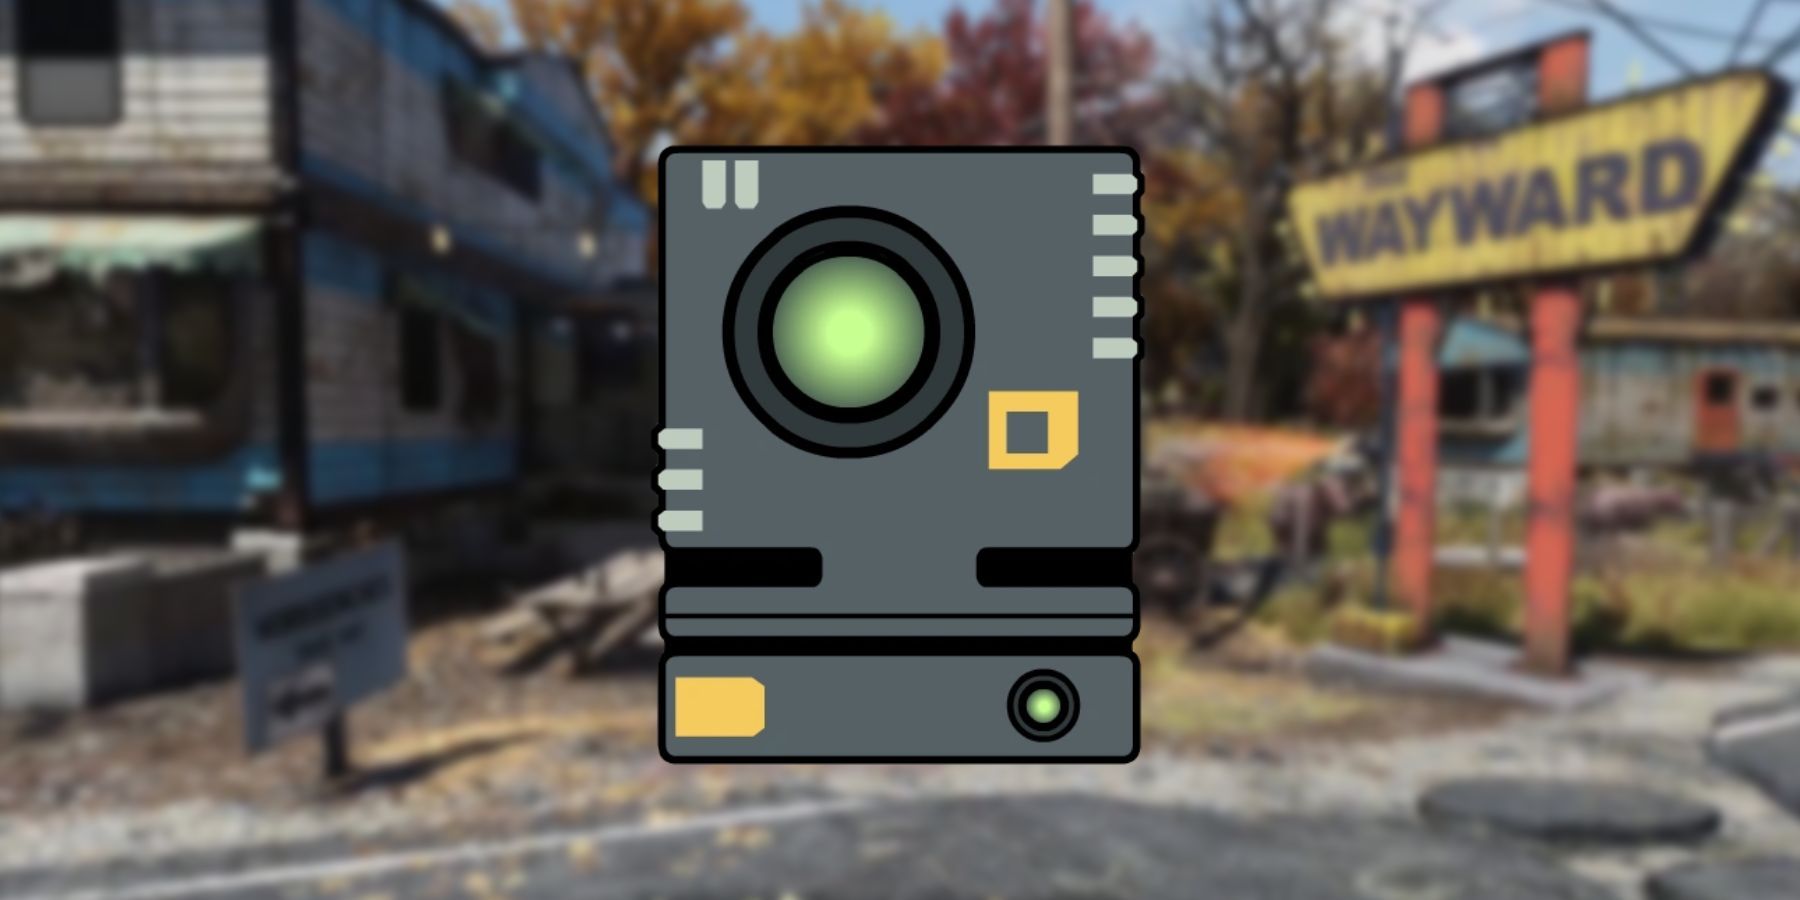 image showing scrip in fallout 76.